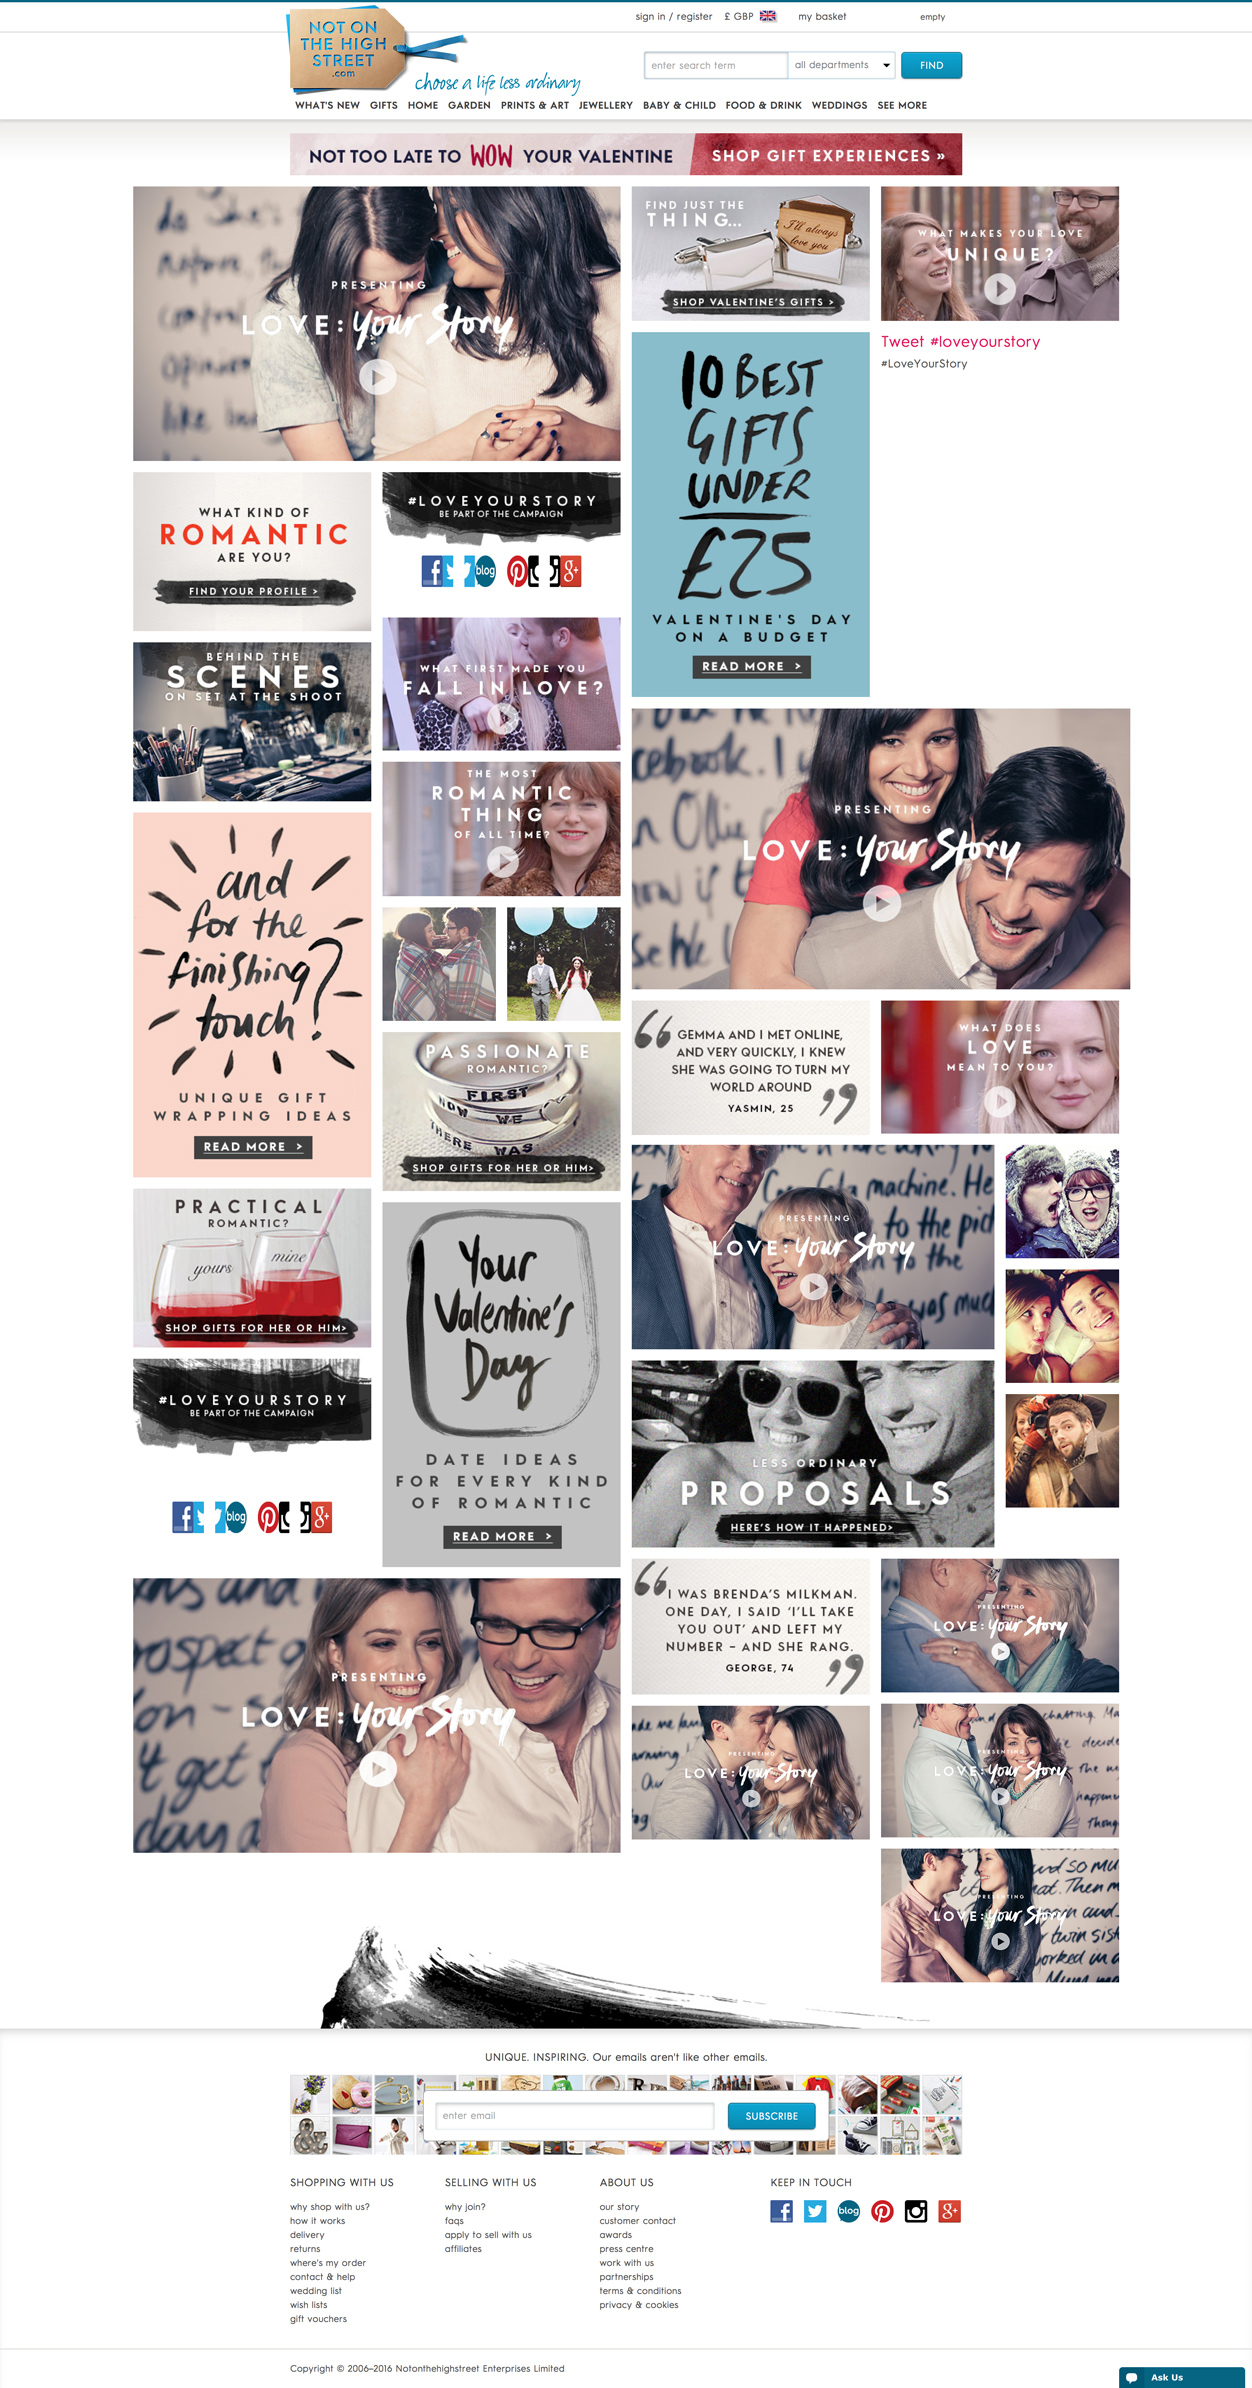 notonthehighstreet.com Valentine's Day campaign blog post Marvellous agency